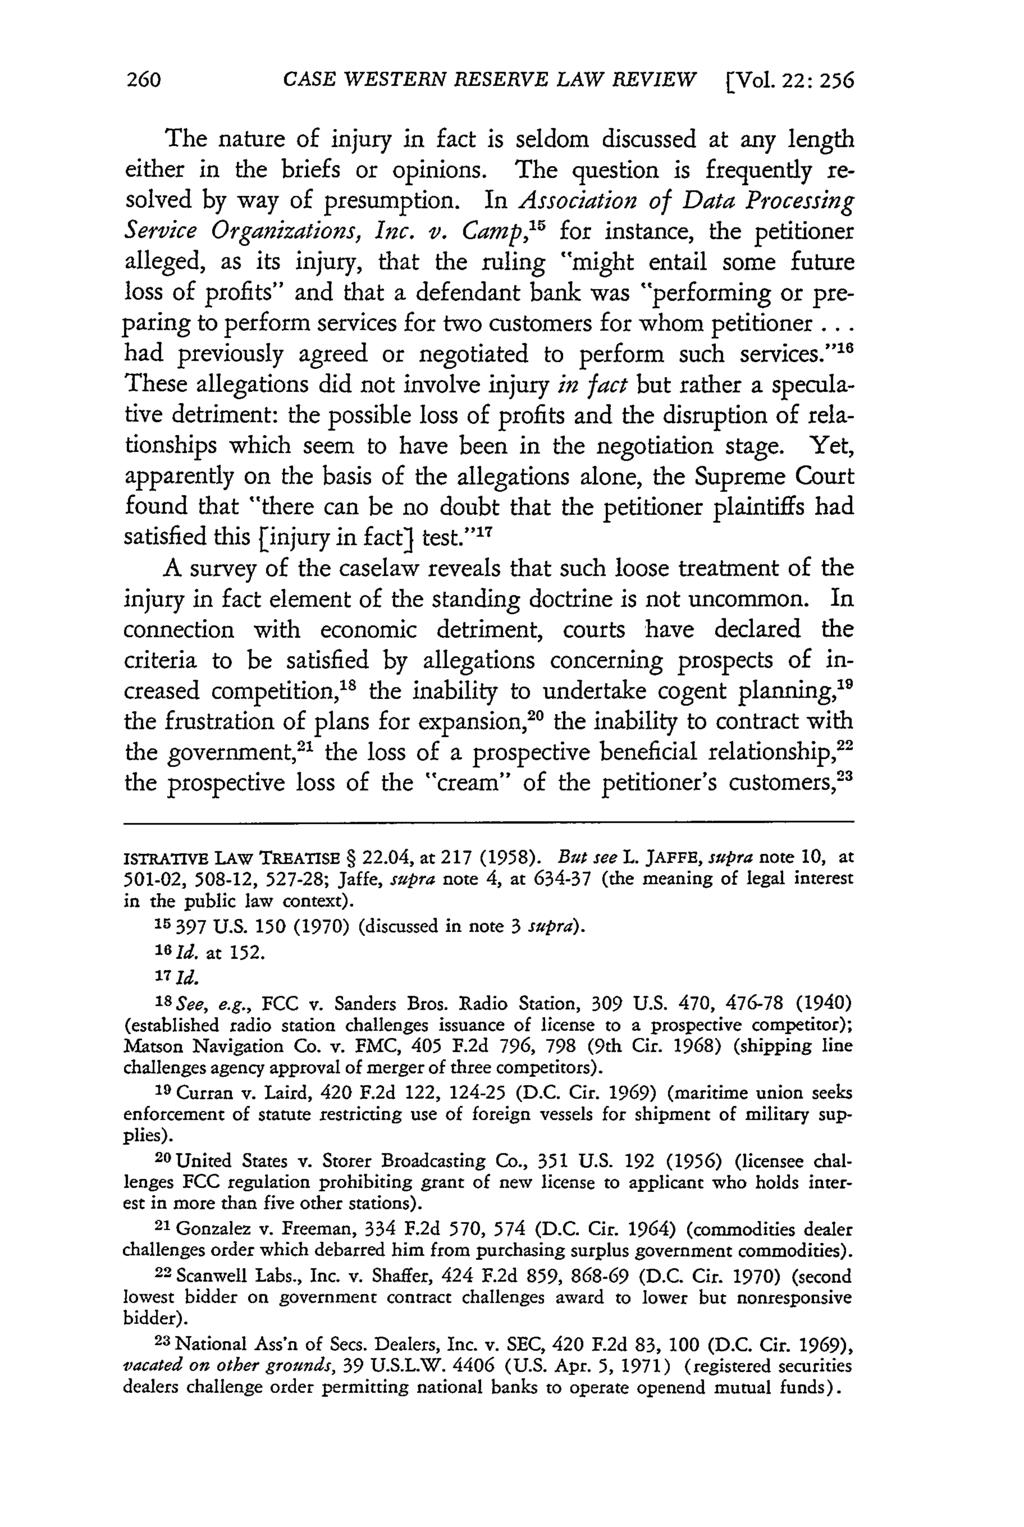 CASE WESTERN RESERVE LAW REVIEW [Vol. 22: 256 The nature of injury in fact is seldom discussed at any length either in the briefs or opinions.